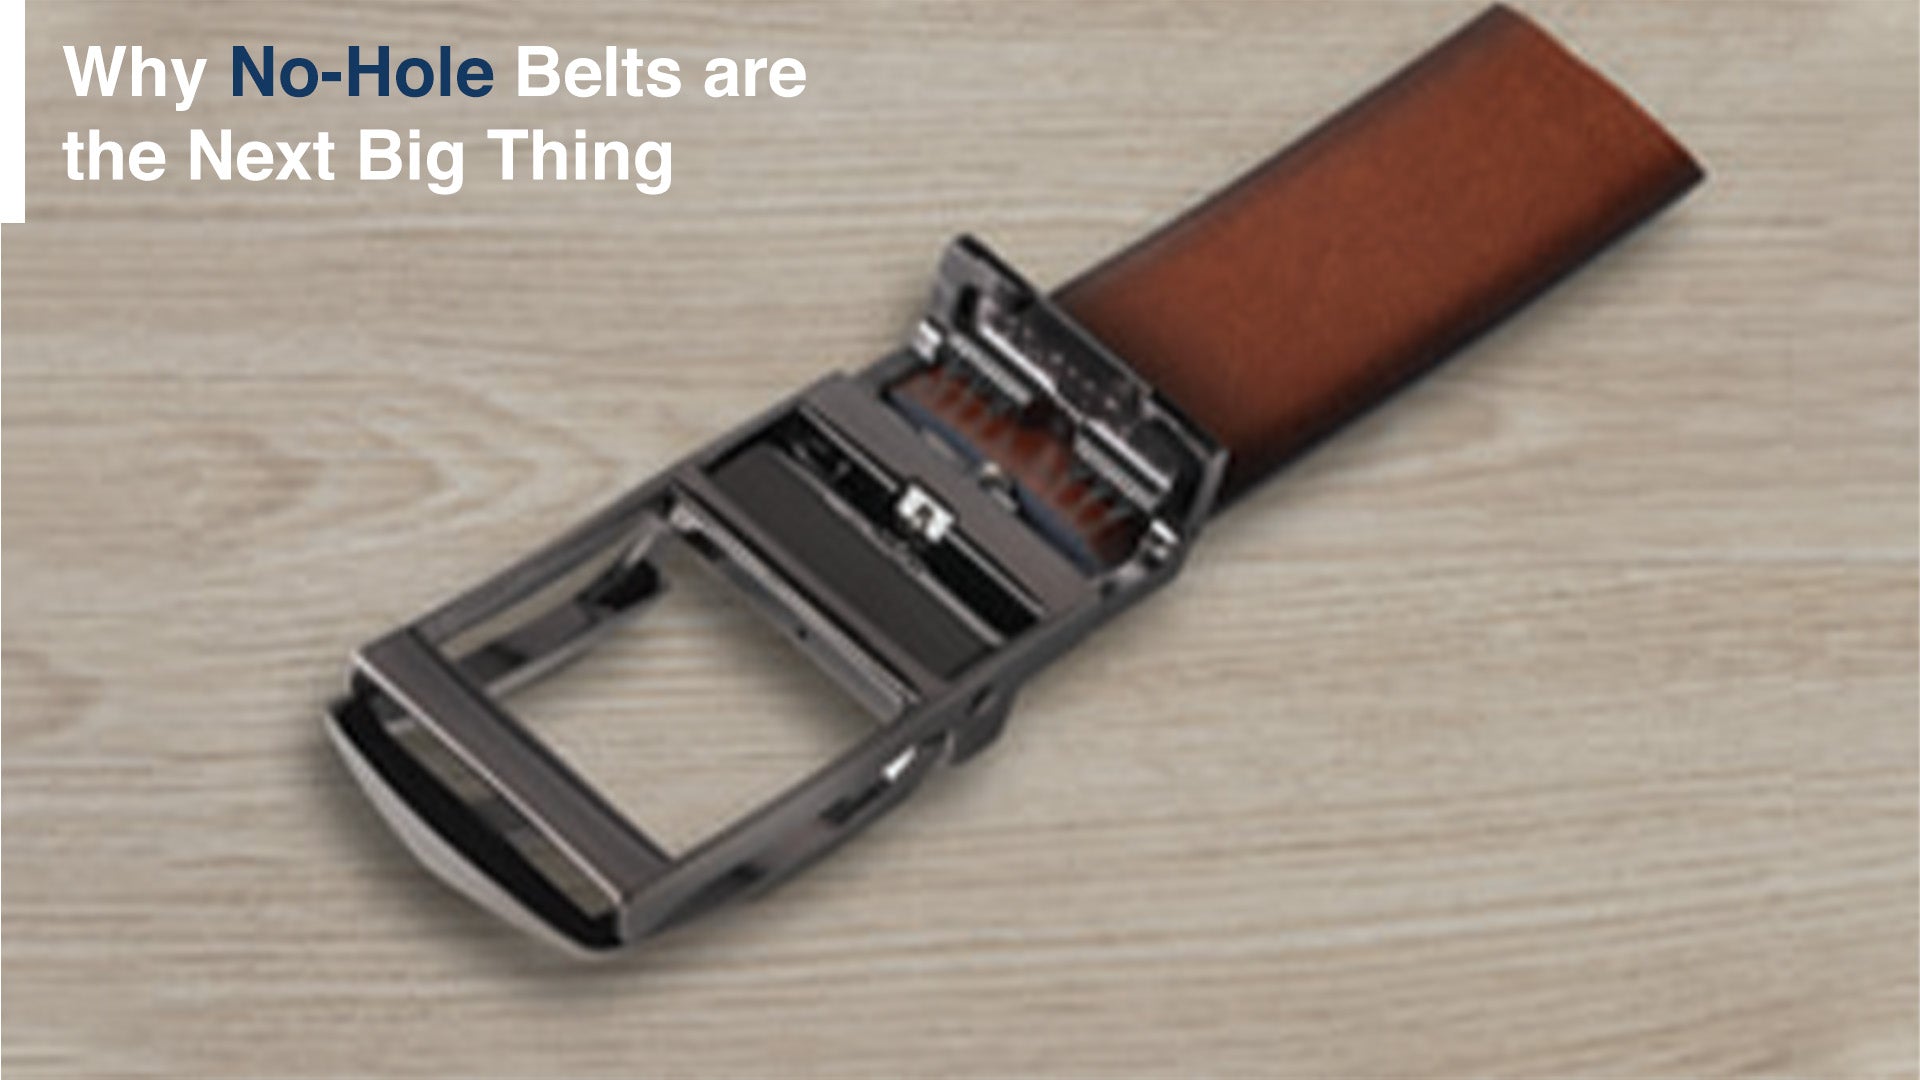 Why No-Hole Belts are the Next Big Thing